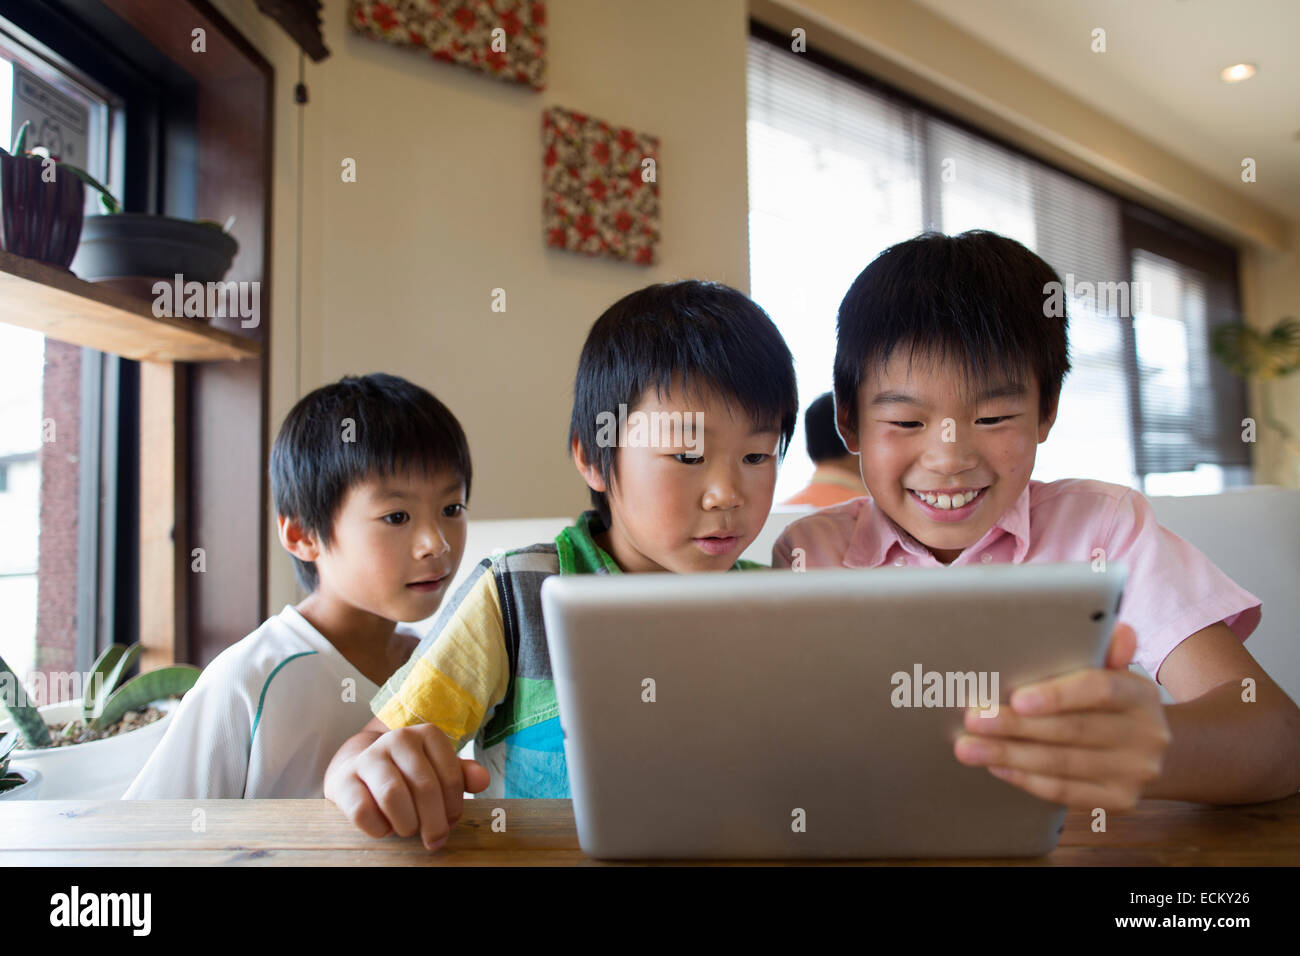 Three boys sitting at a table, looking at a digital tablet, smiling. Stock Photo